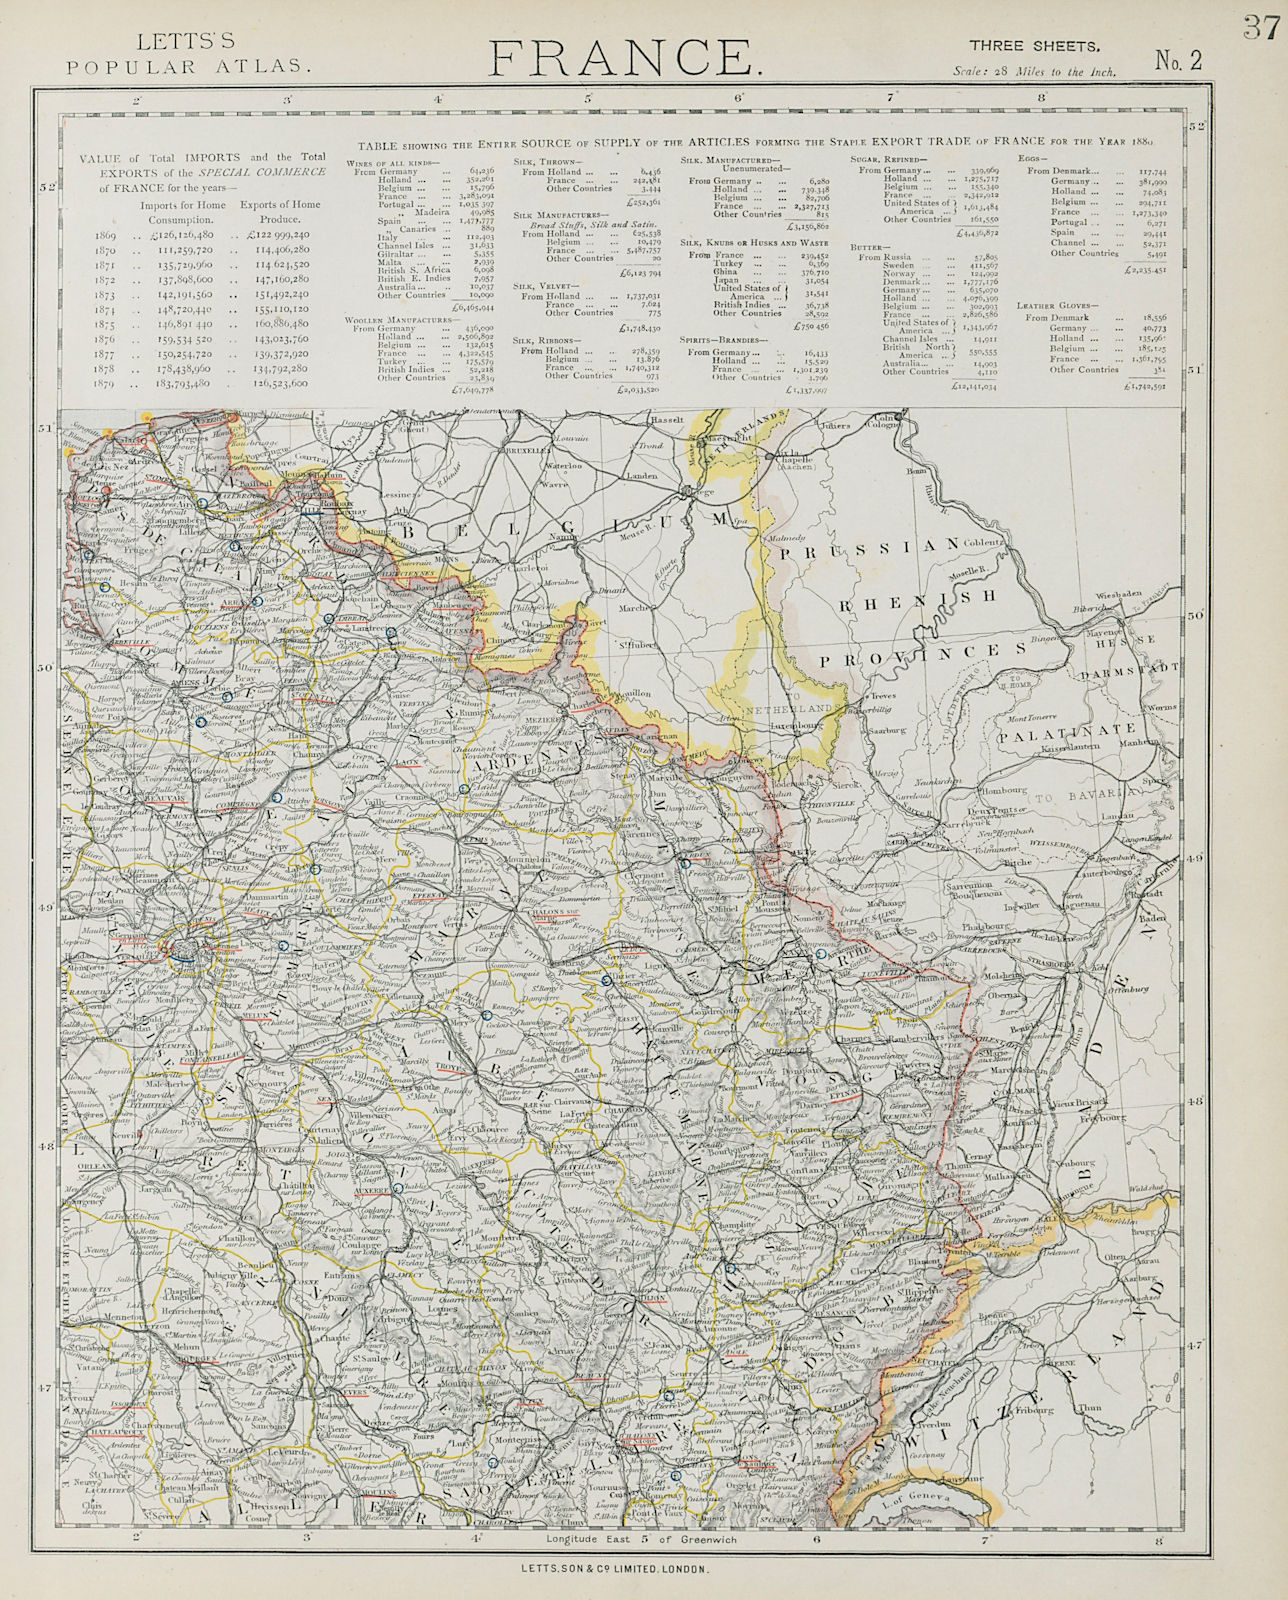 NE FRANCE w/o Alsace Lorraine. Champagne Picardy Burgundy Nord.LETTS 1884 map